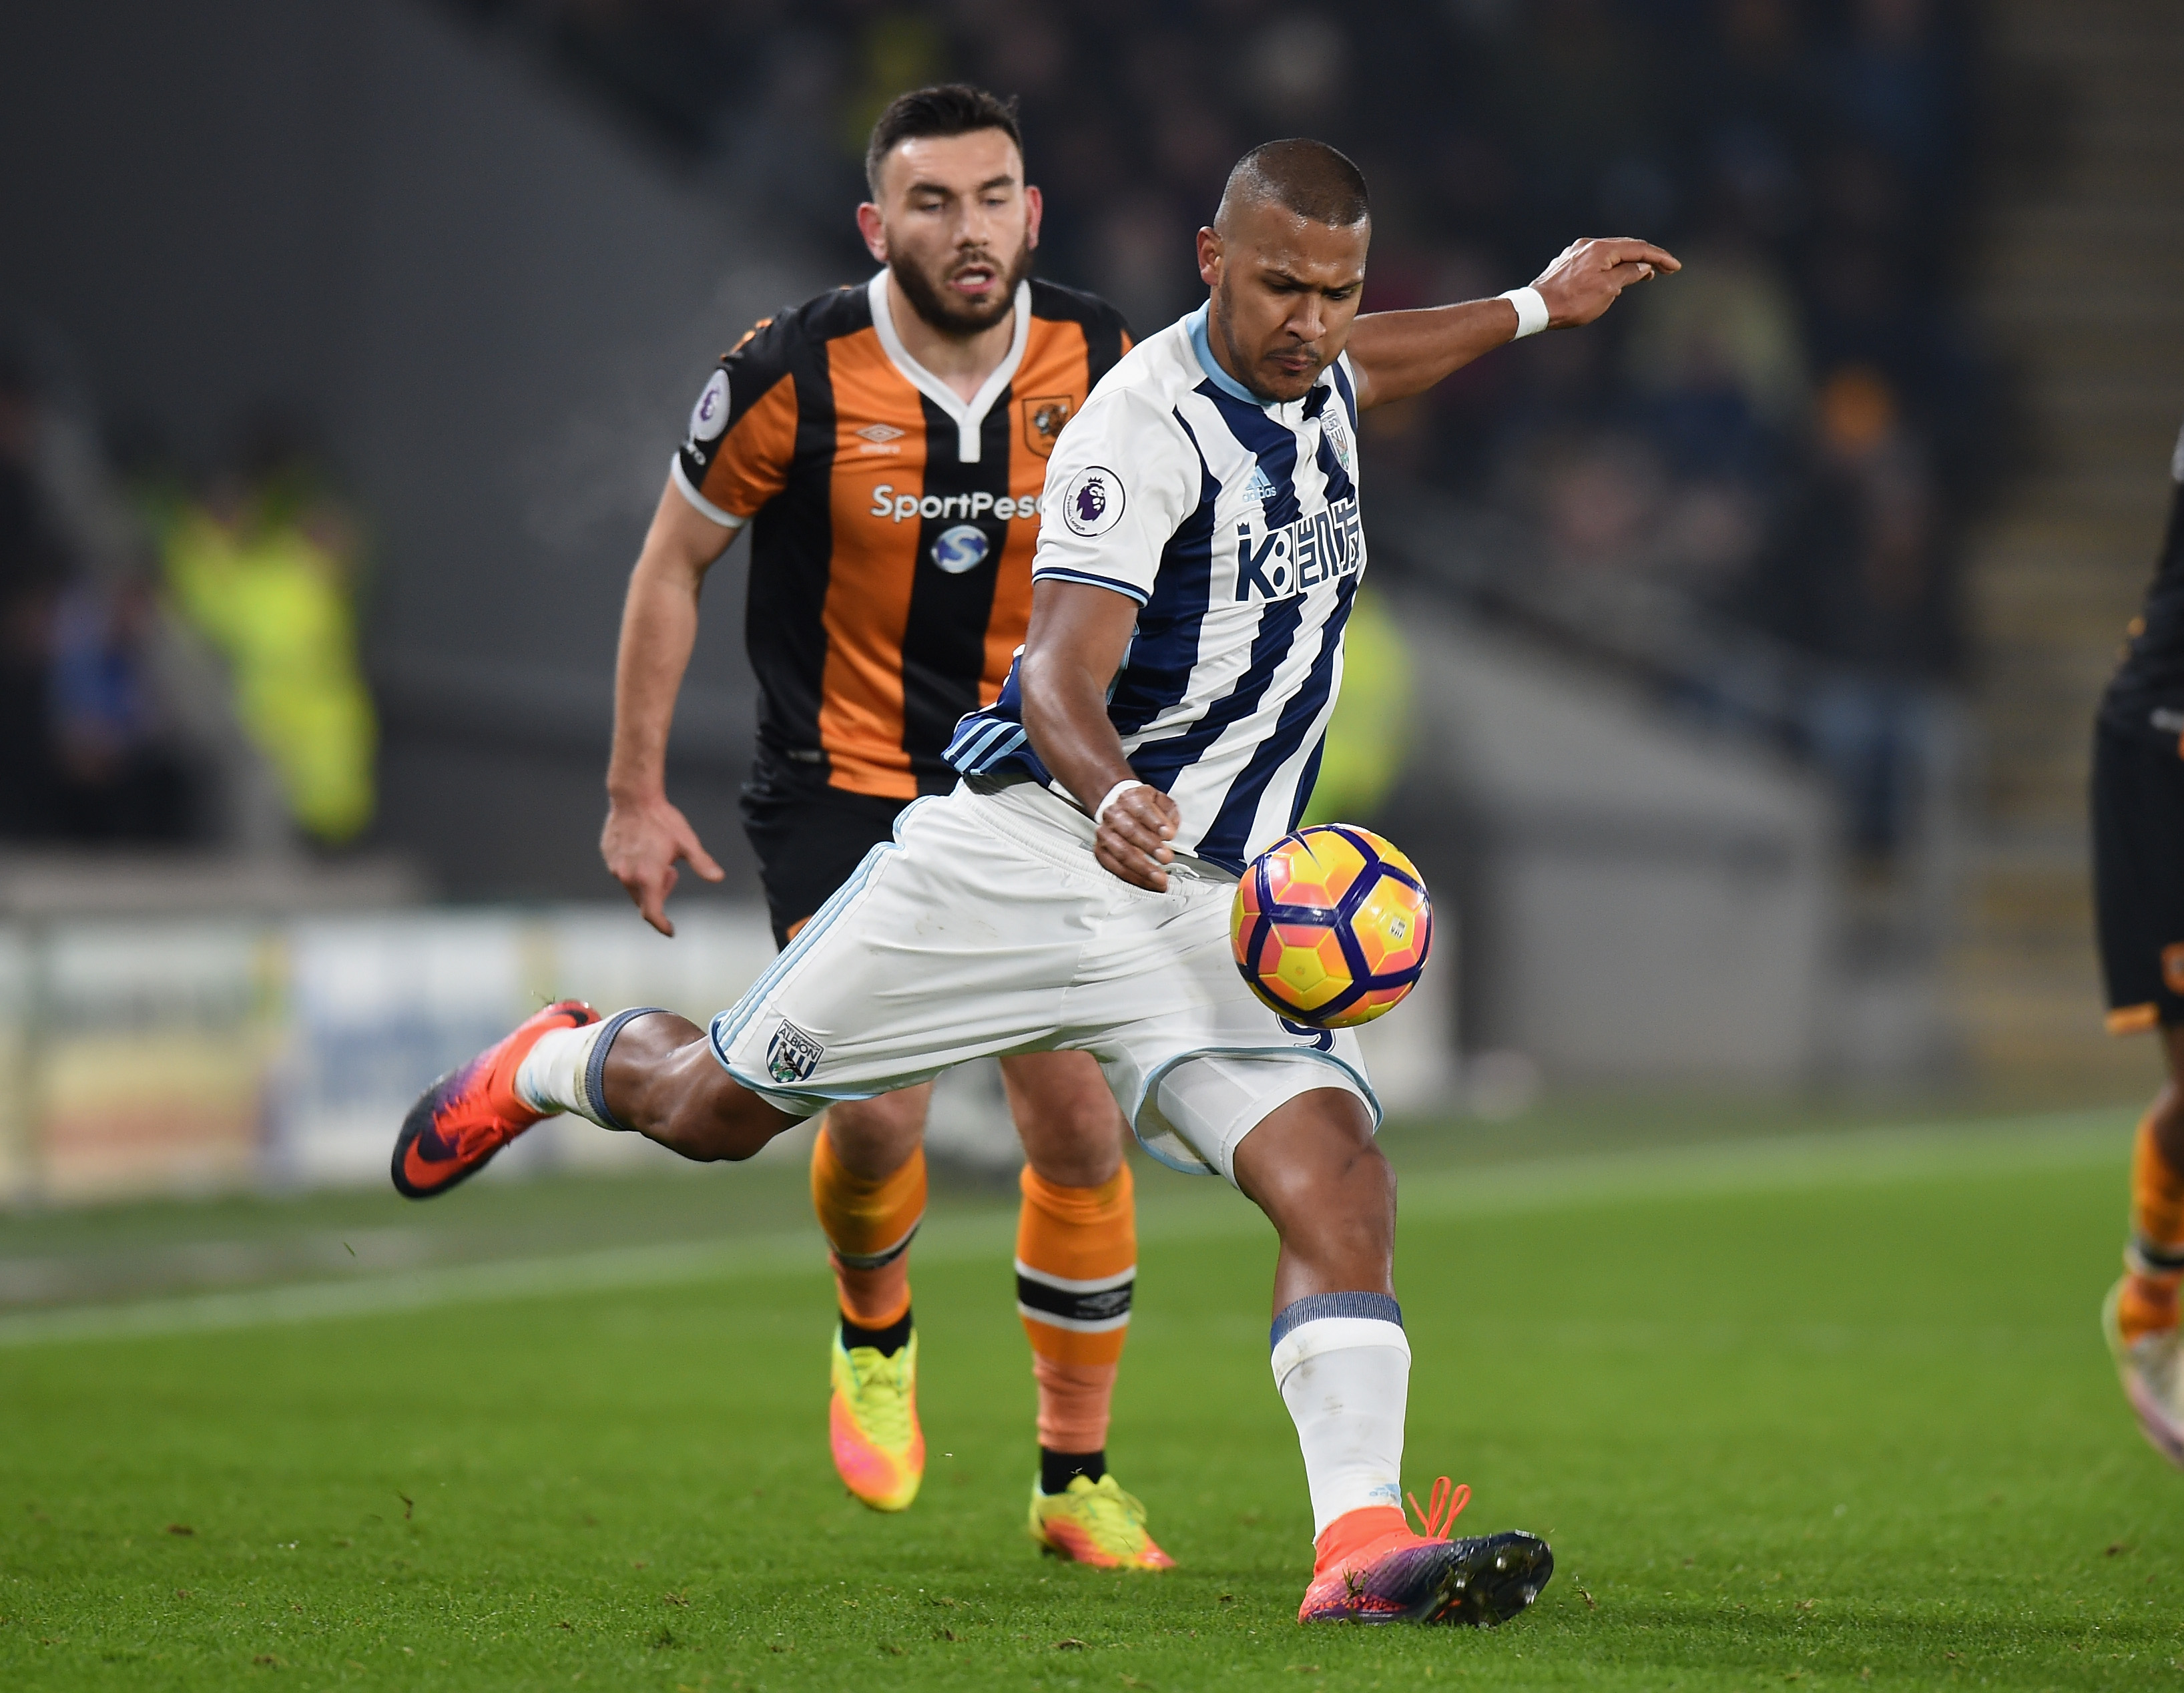 HULL, ENGLAND - NOVEMBER 26: Solomon Rondon of  West Bromwich Albion during the Premier League match between Hull City and West Bromwich Albion at KCOM Stadium on November 26, 2016 in Hull, England.  (Photo by Tony Marshall/Getty Images)